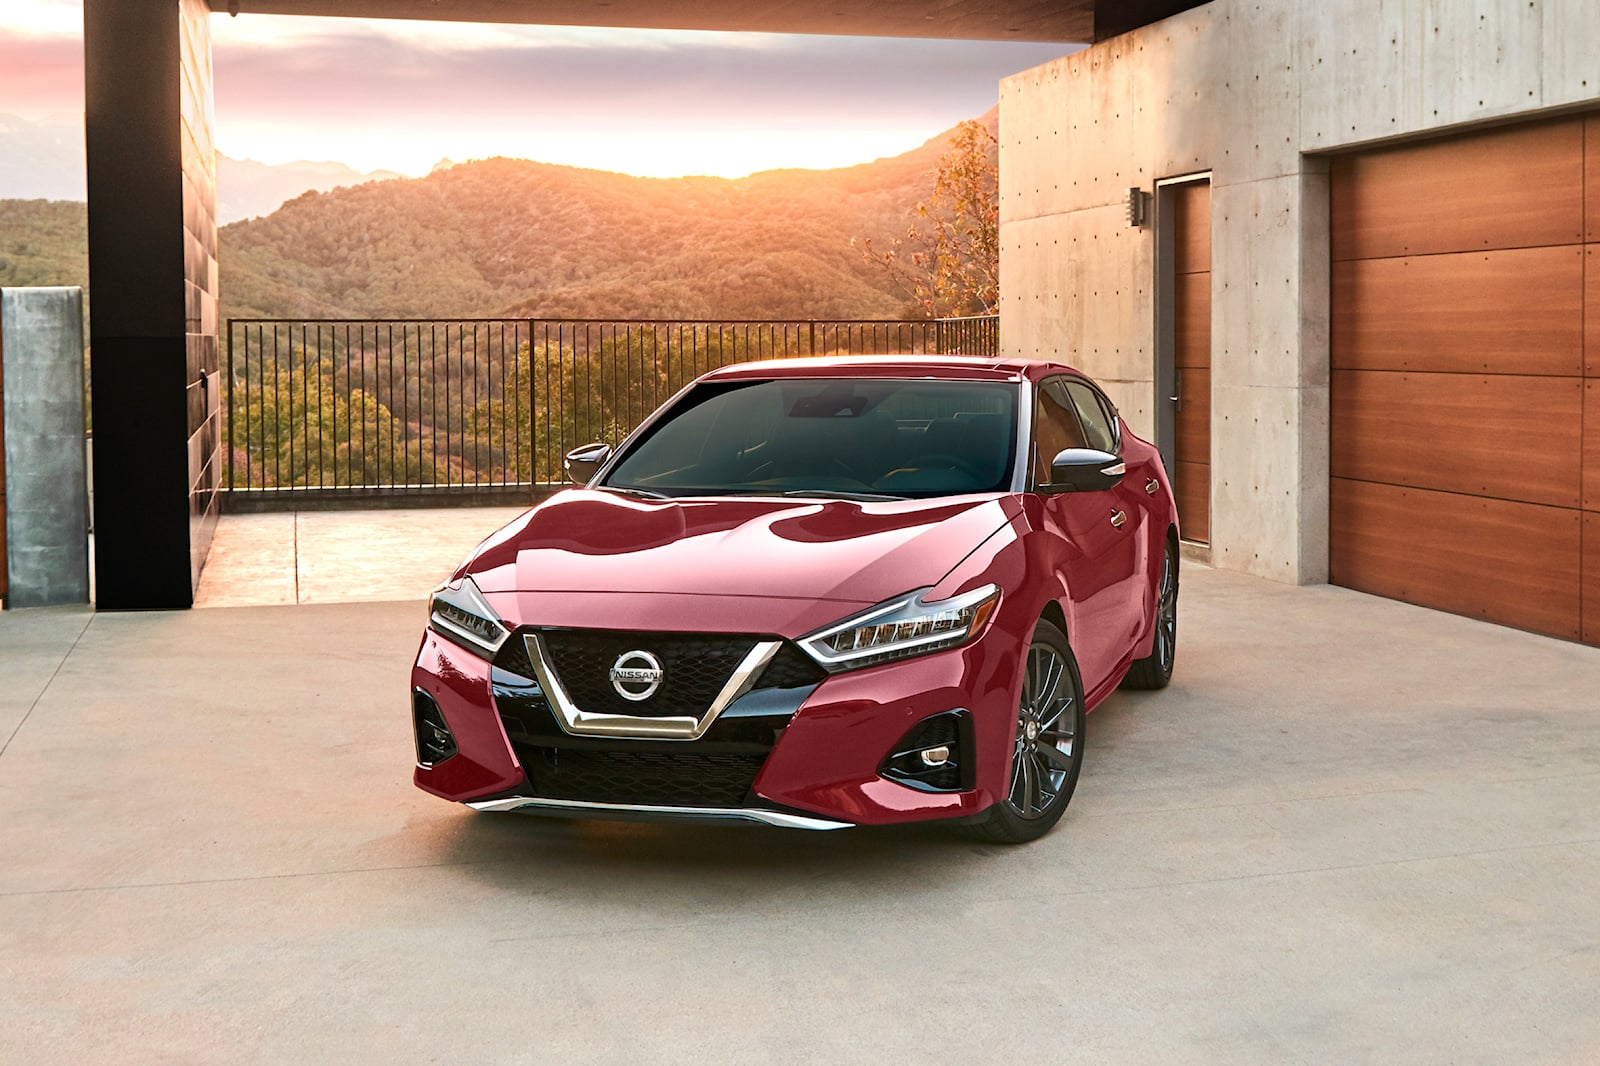 2020 Nissan Maxima Front Angle View